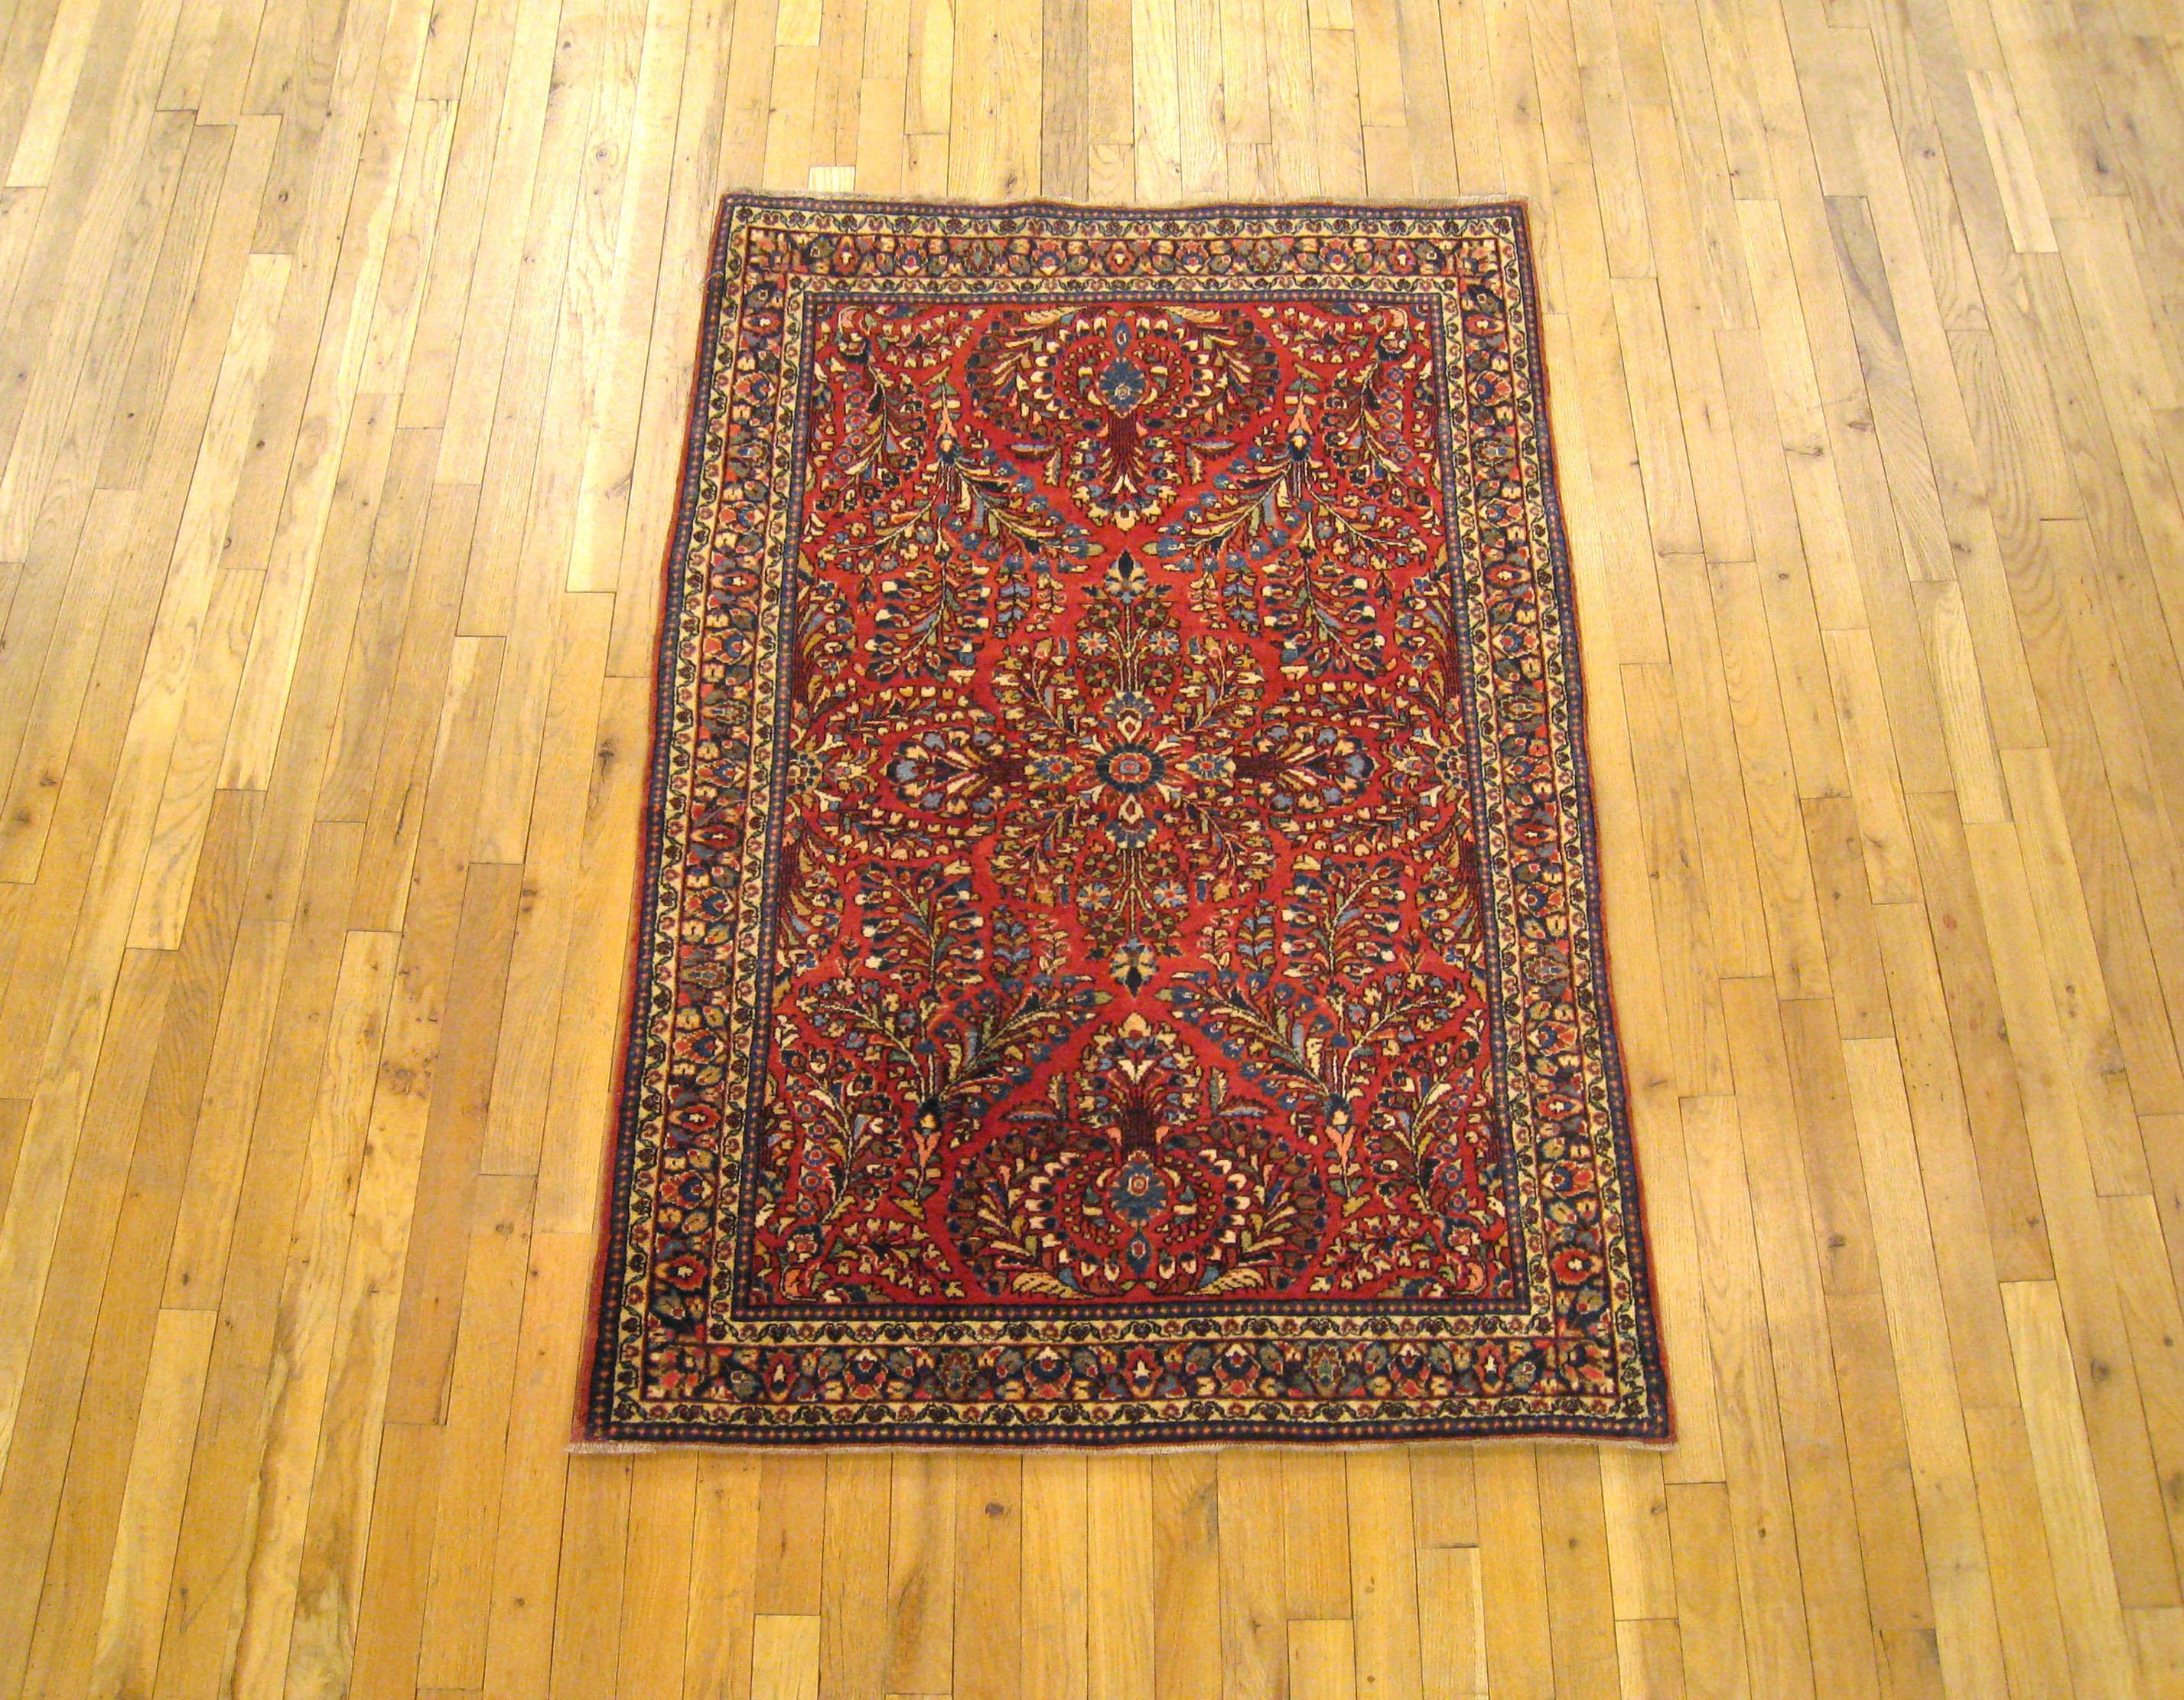 An antique Persian Sarouk oriental rug, circa 1920. Size 5'0 x 3'3. This delightful hand knotted Persian rug is characterized by an elaborate floral design in the red central field, which is enclosed within a scrolling foliate blue border. Composed